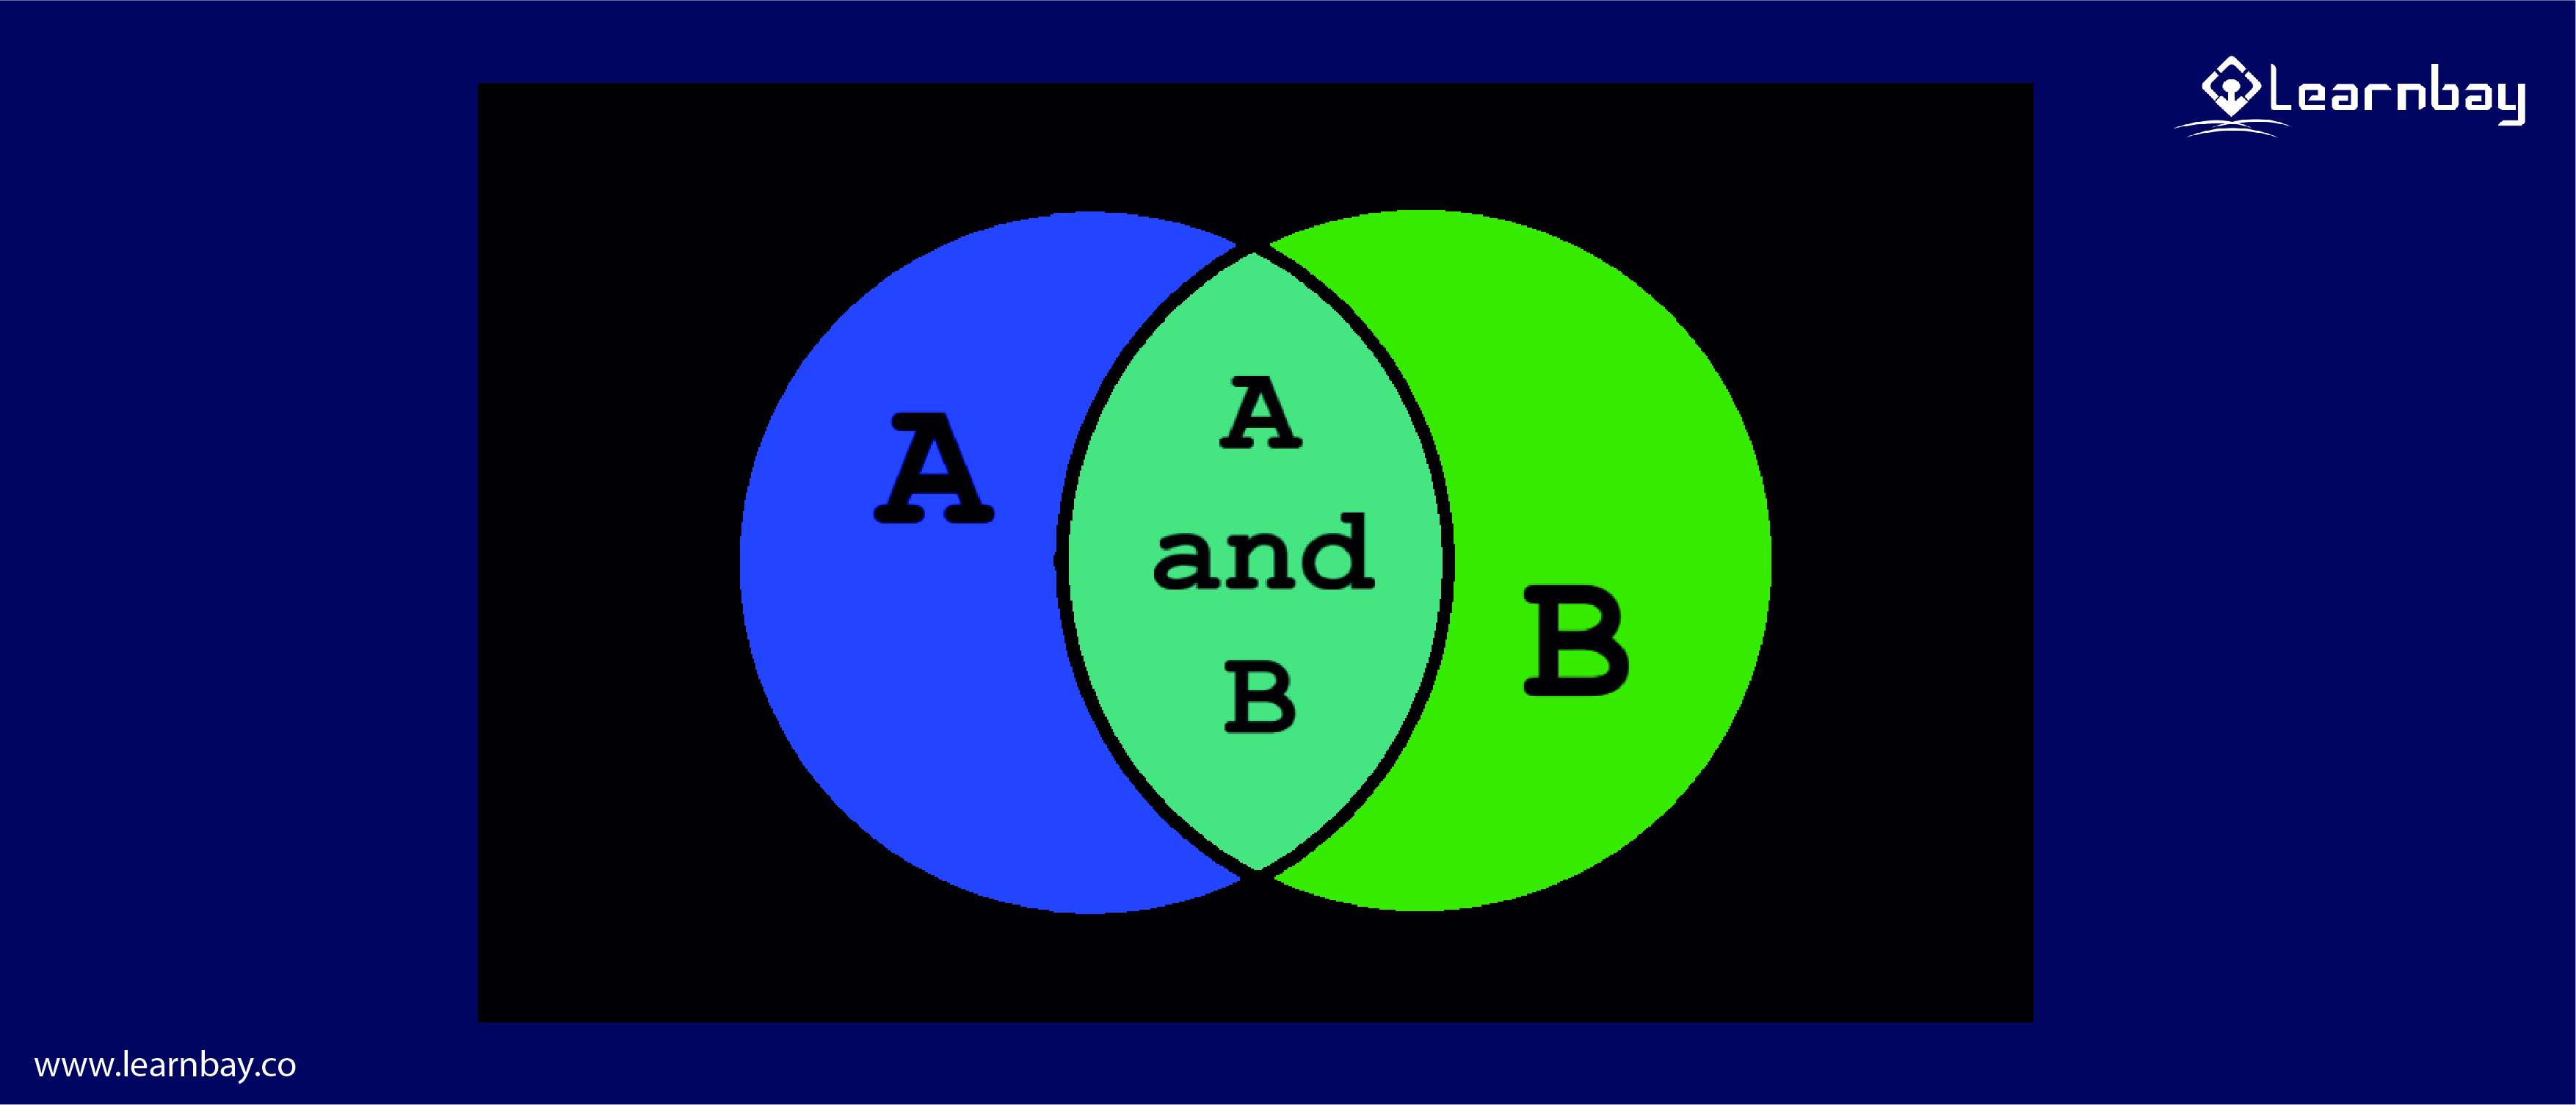 An image suggests an example of numeric data types with the functions A and B.